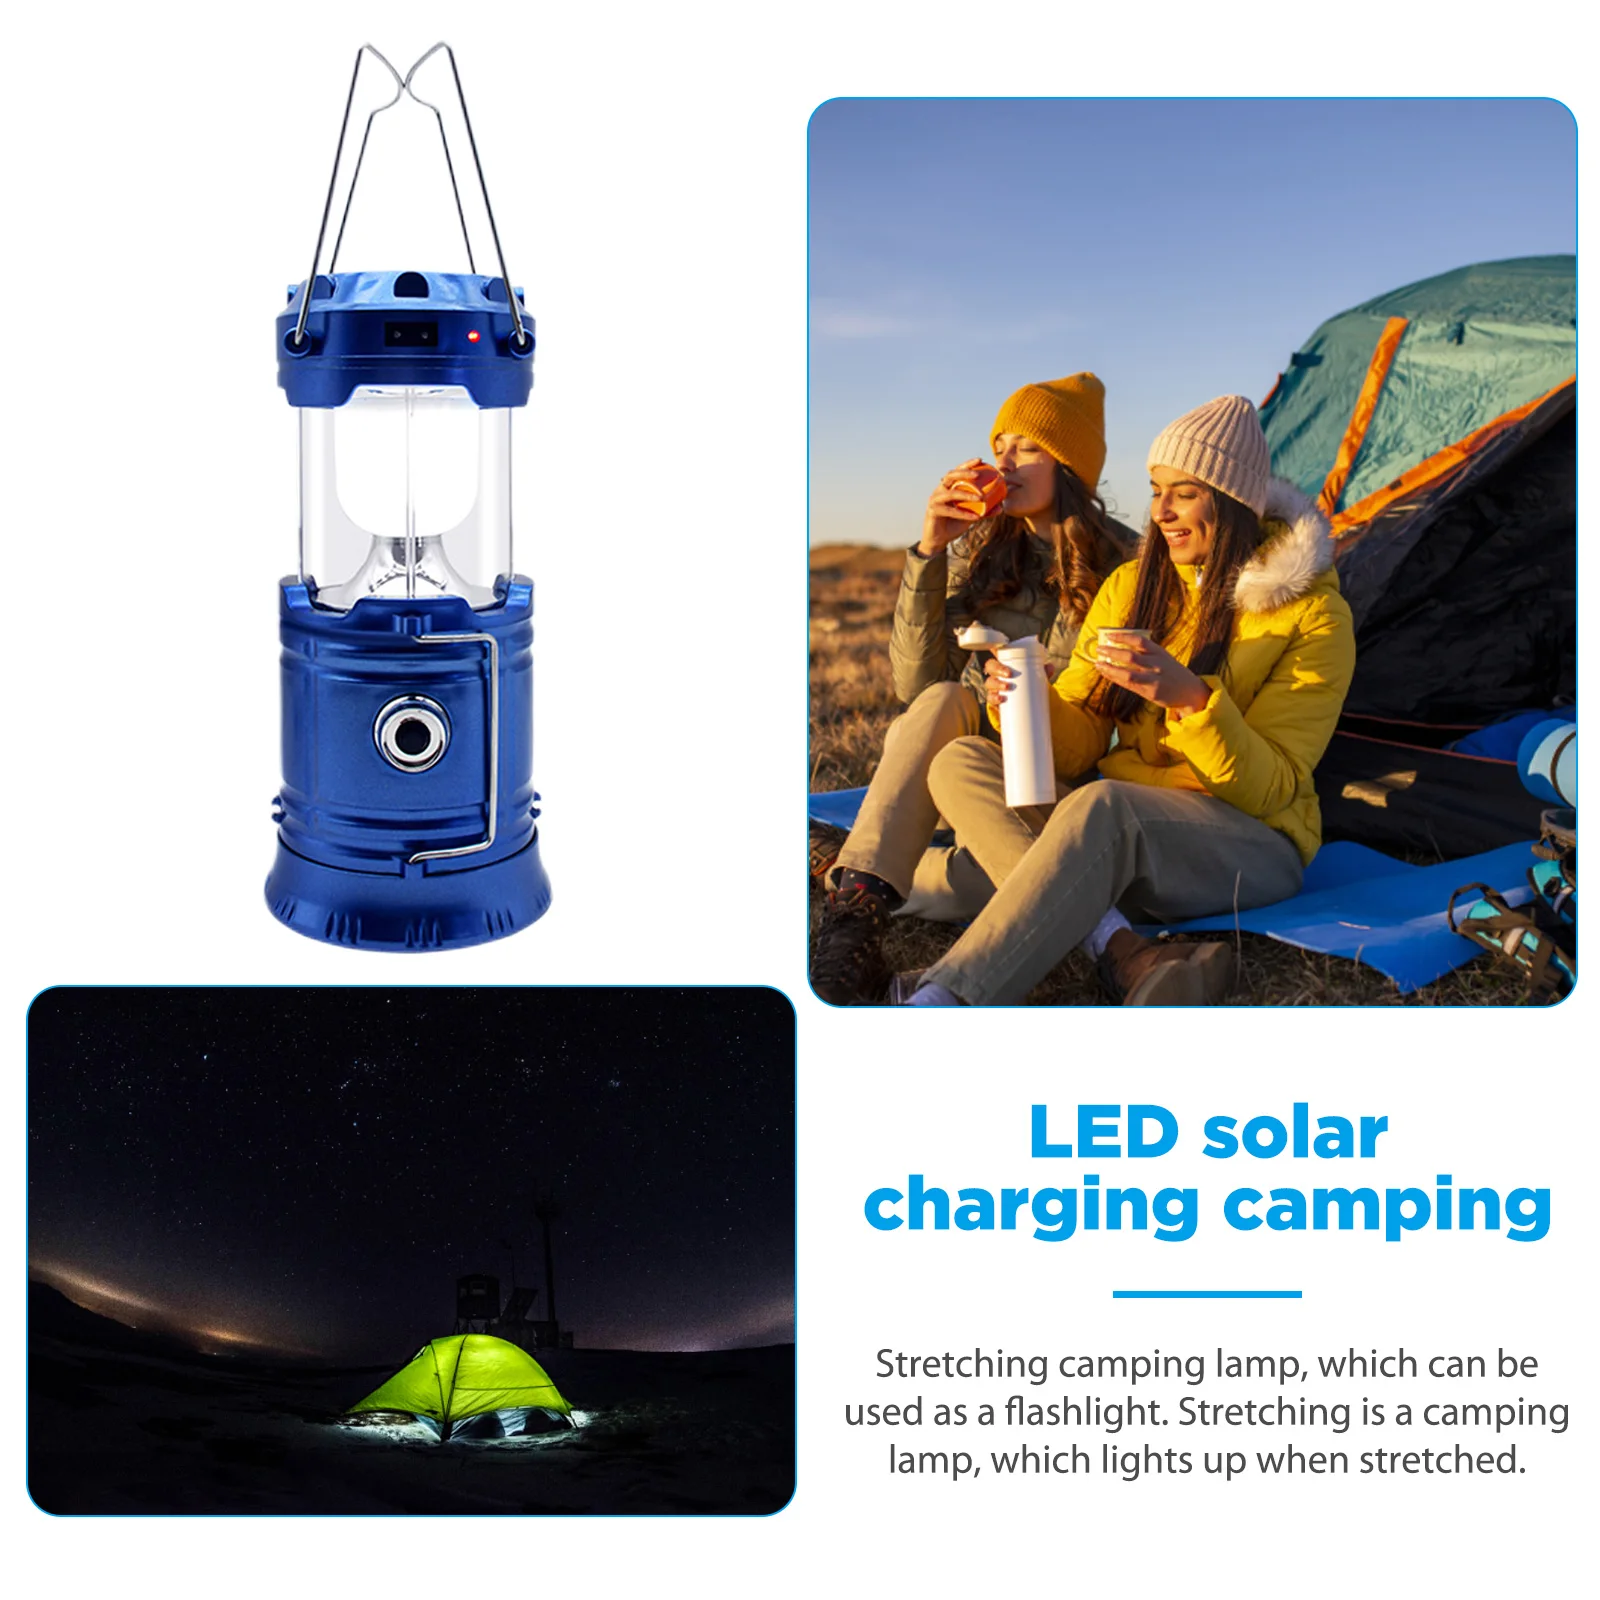 https://ae01.alicdn.com/kf/Sa71db9c675f34e4fa047d8350501f5166/Telescopic-Camping-Lantern-Light-LED-Camping-Lamps-Outdoor-Survival-Gear-Handheld-Tent-Lamp-for-Travel-Hiking.jpg